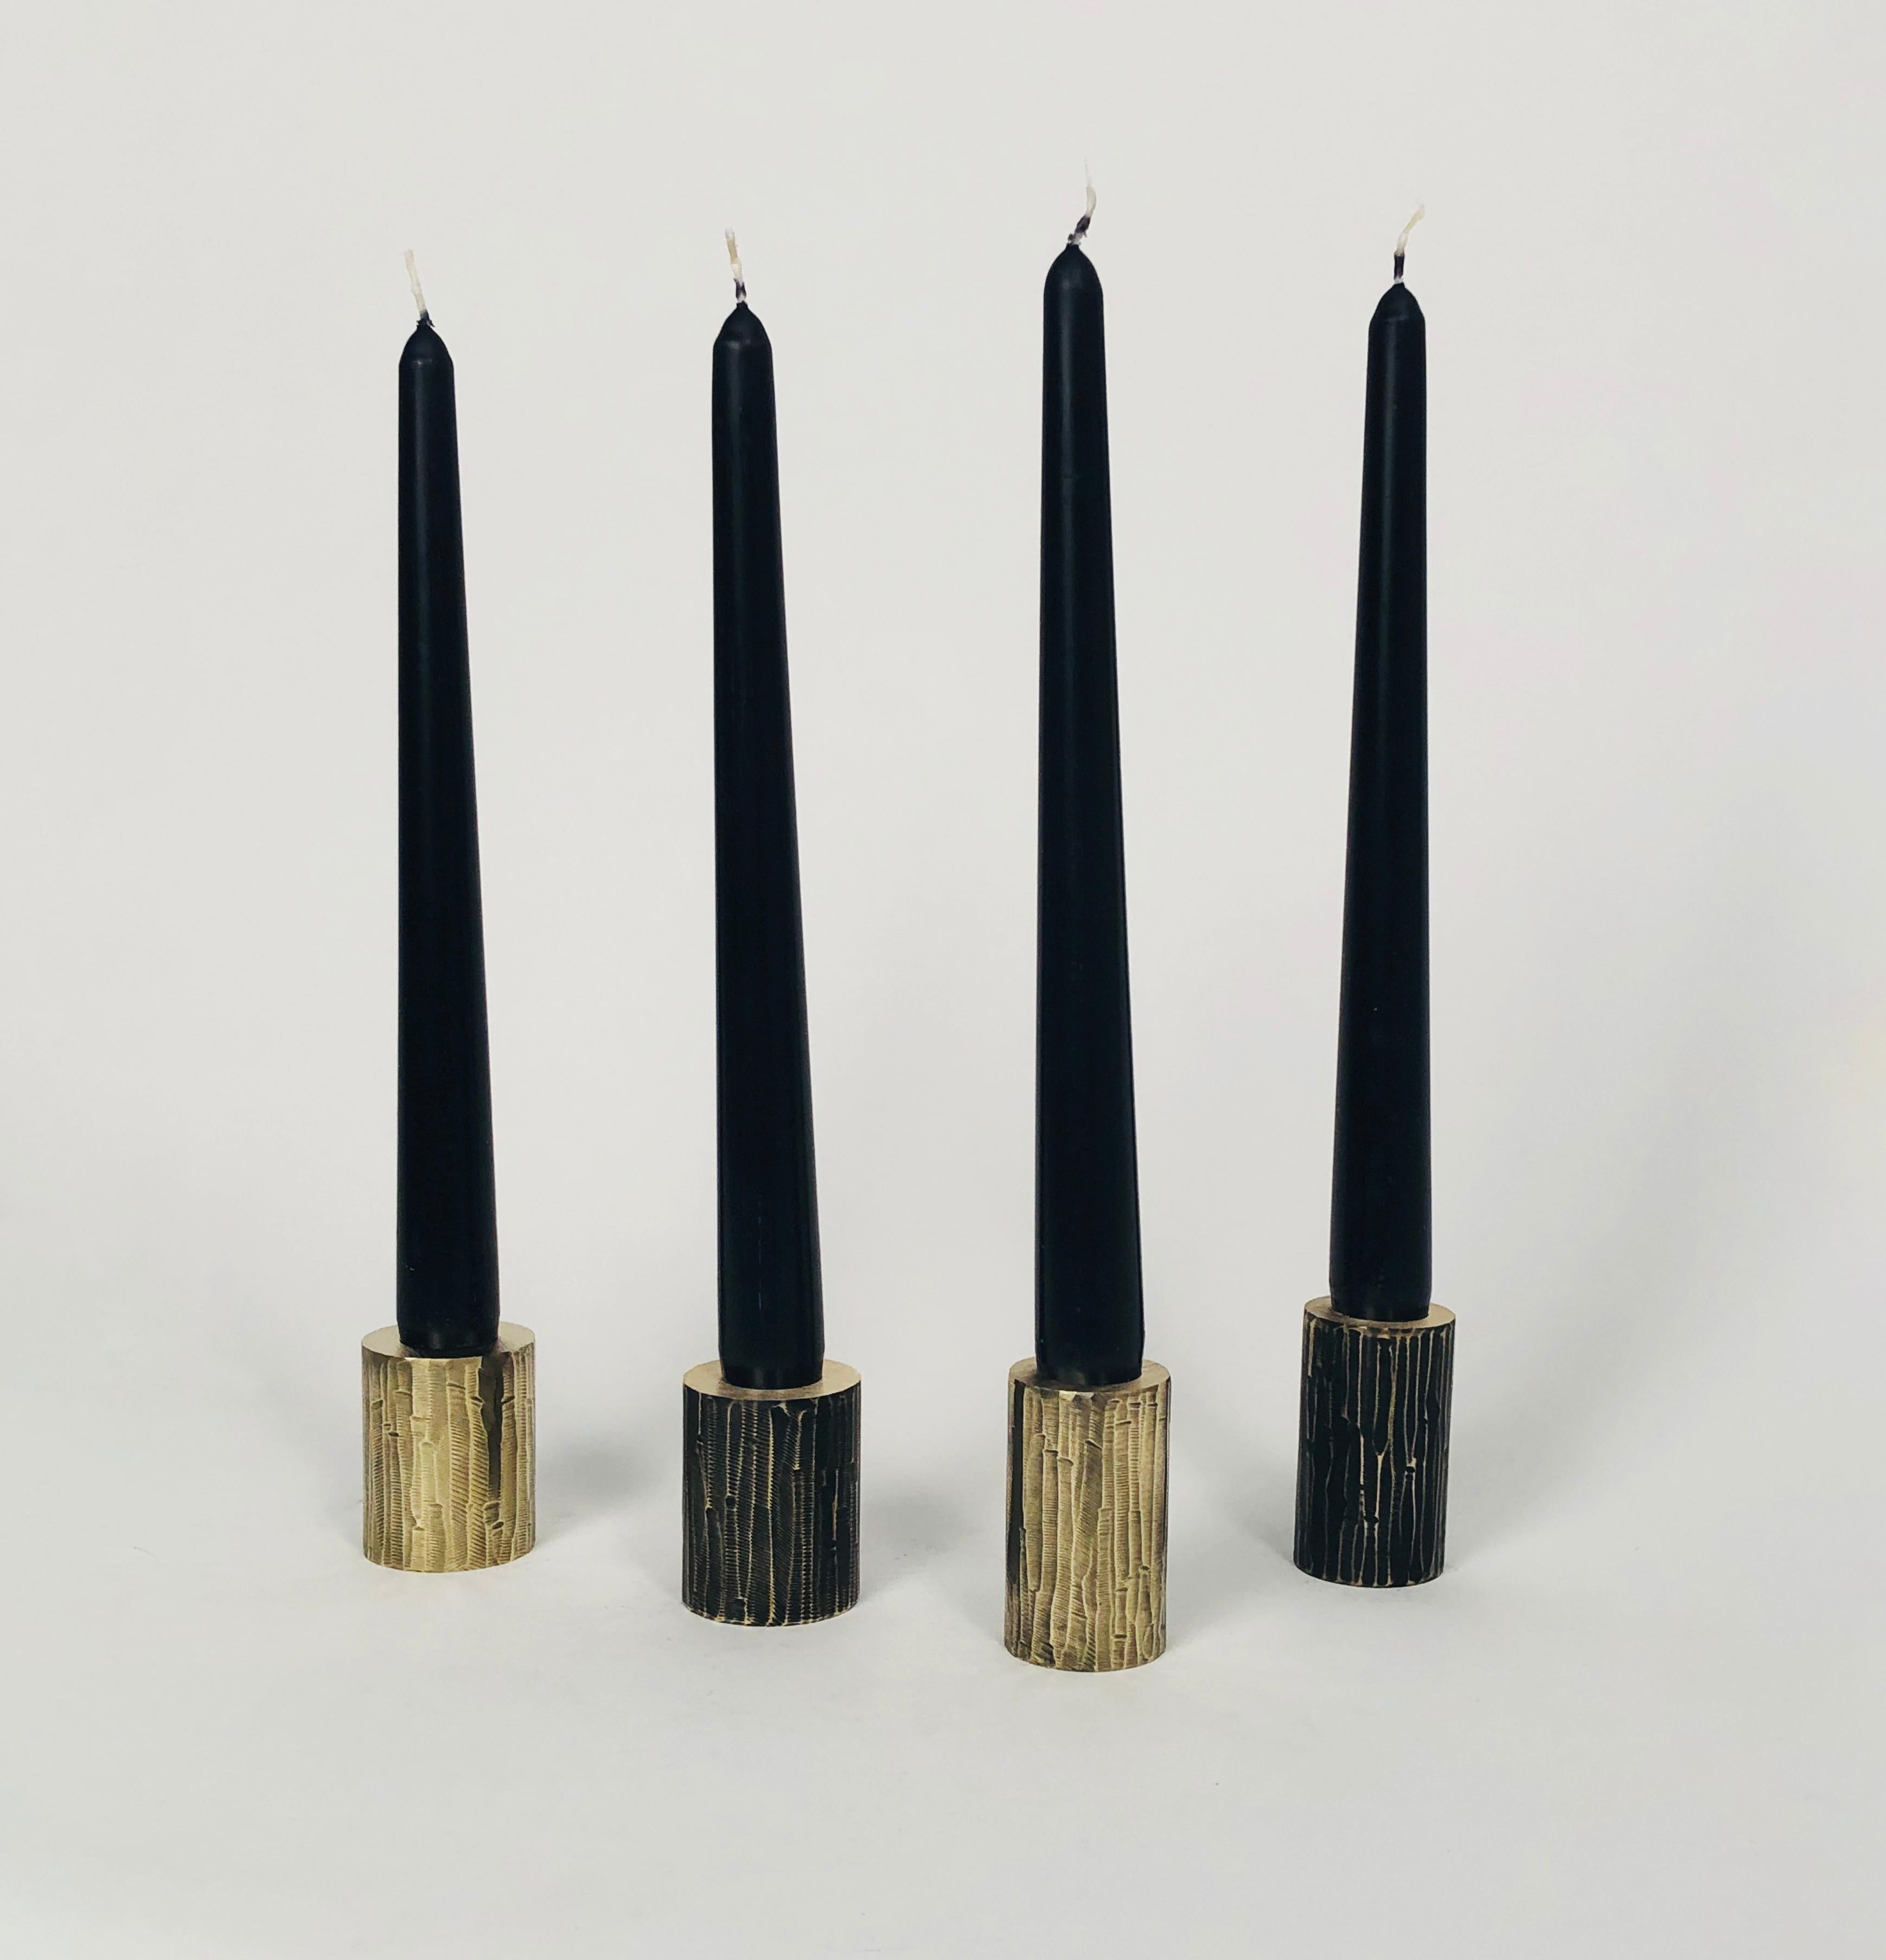 Set of 4 solid brass sculpted candleholders by William Guillon 
Each is signed William Guillon
Dimensions: Diameter 4 x height 5 cm
 Diameter 3.5 x height 6 cm
Materials: Solid brass raw finish or patinated black, with polished edge
Hand-sculpted in